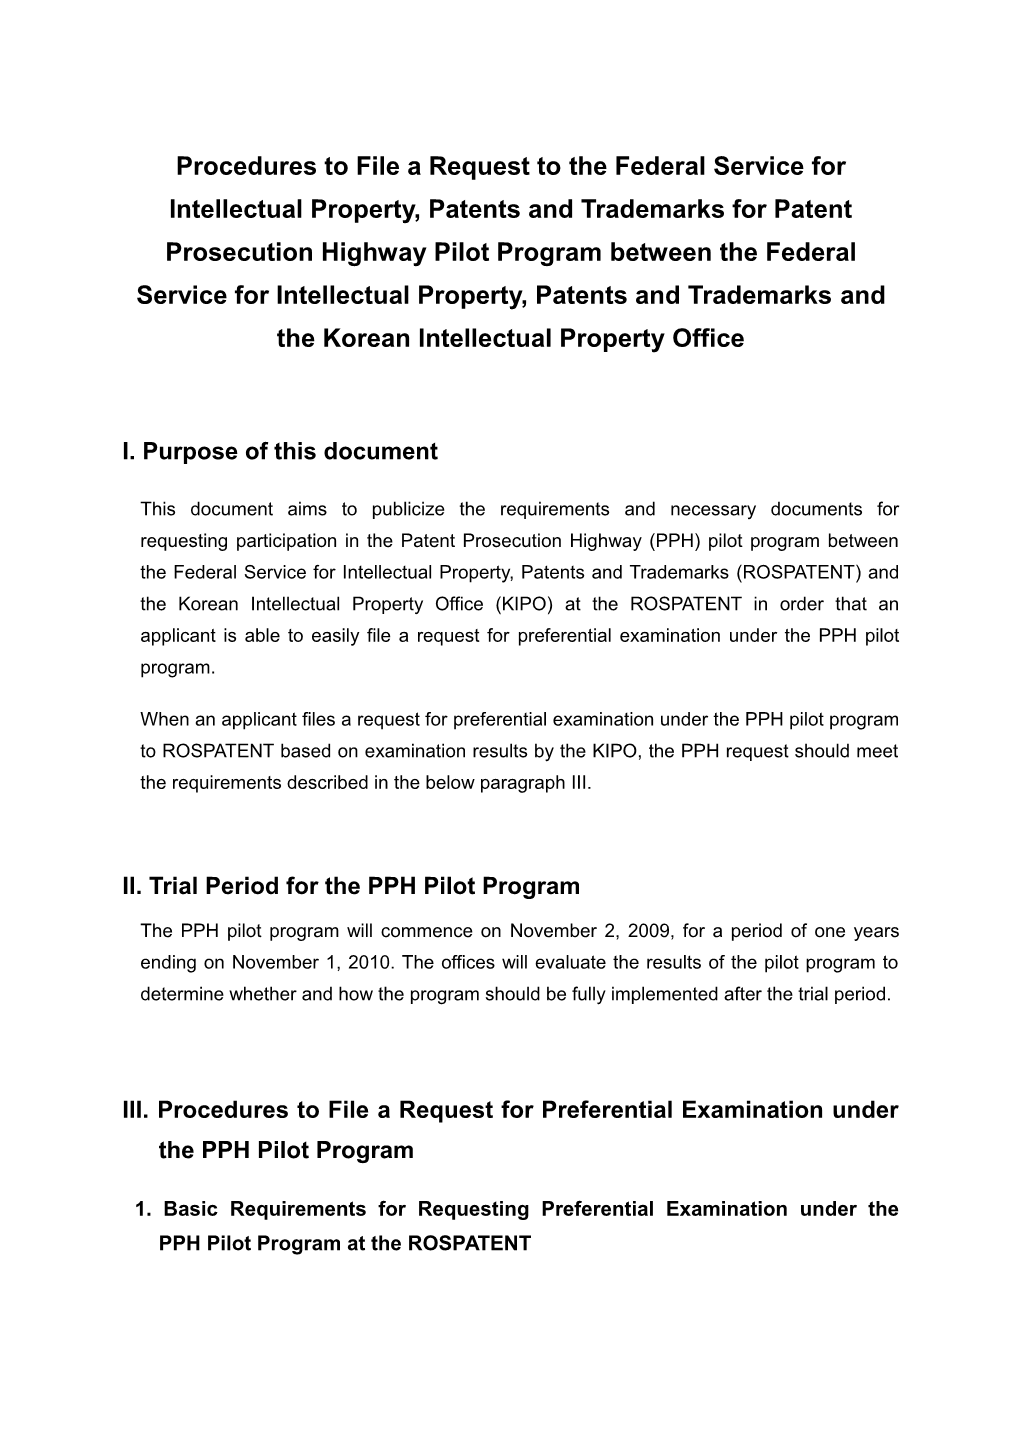 II. Trial Period for the PPH Pilot Program